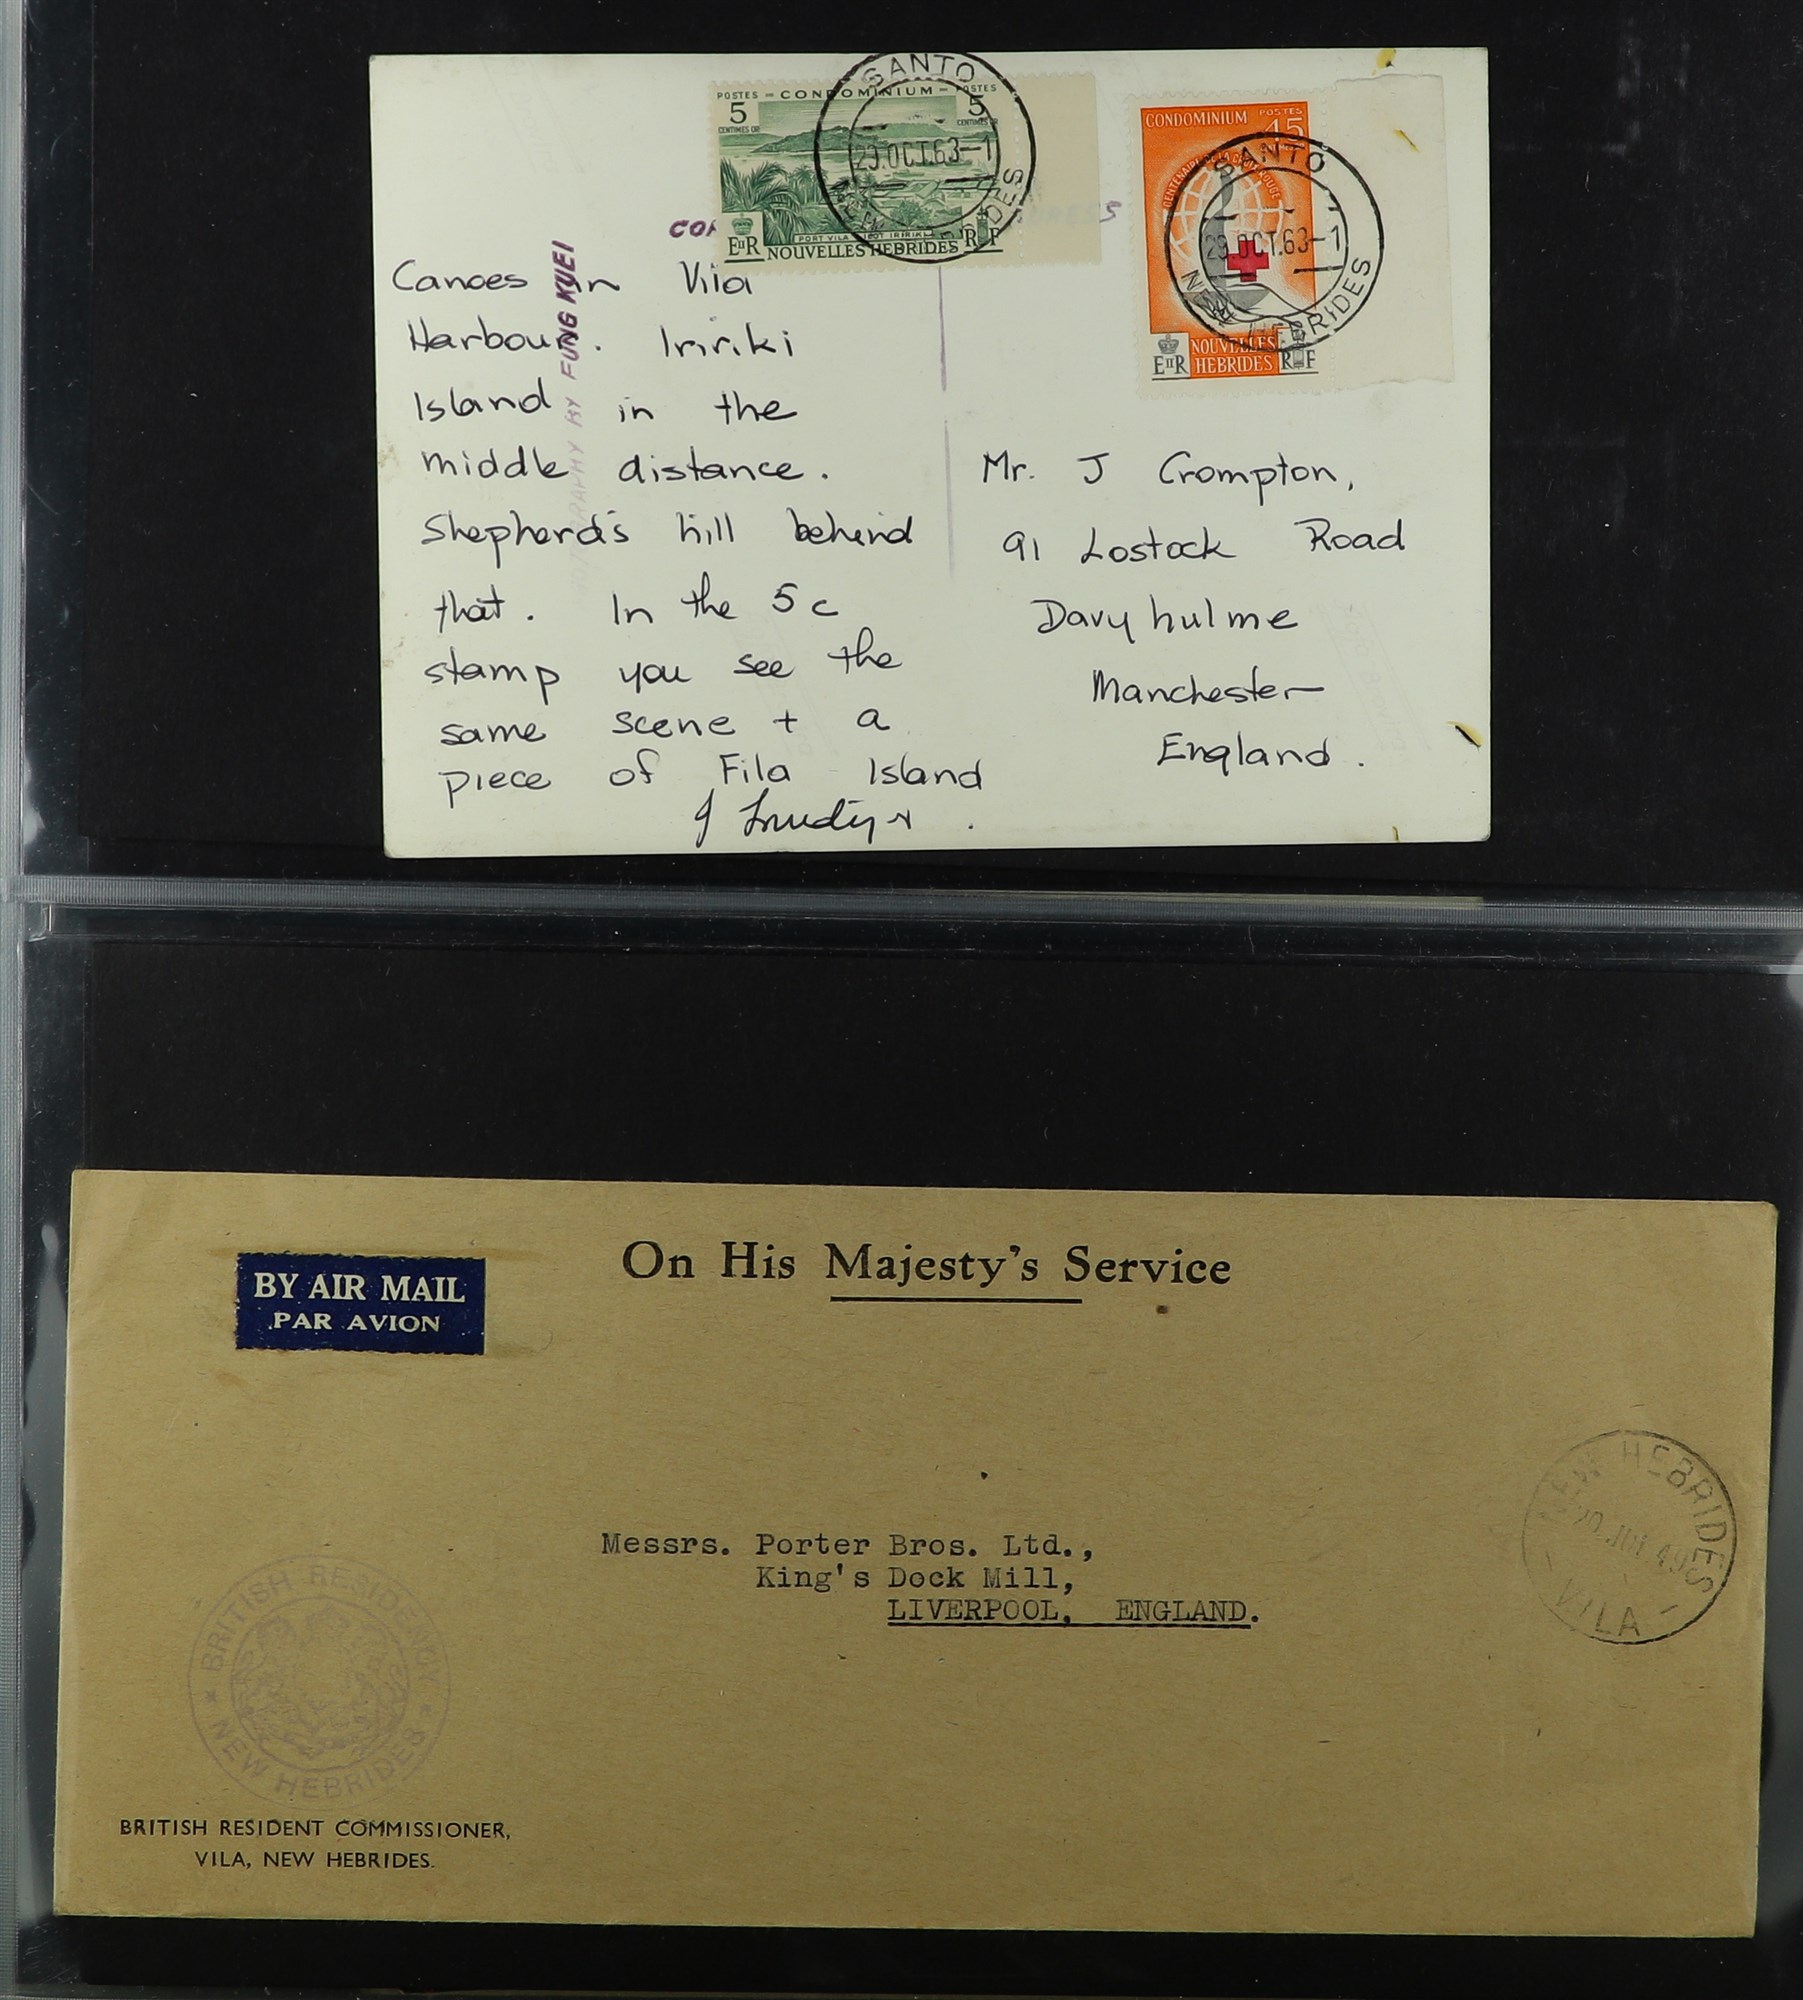 NEW HEBRIDES ENGLISH 1953-69 covers collection, with commercial & philatelic covers, registered - Image 8 of 15